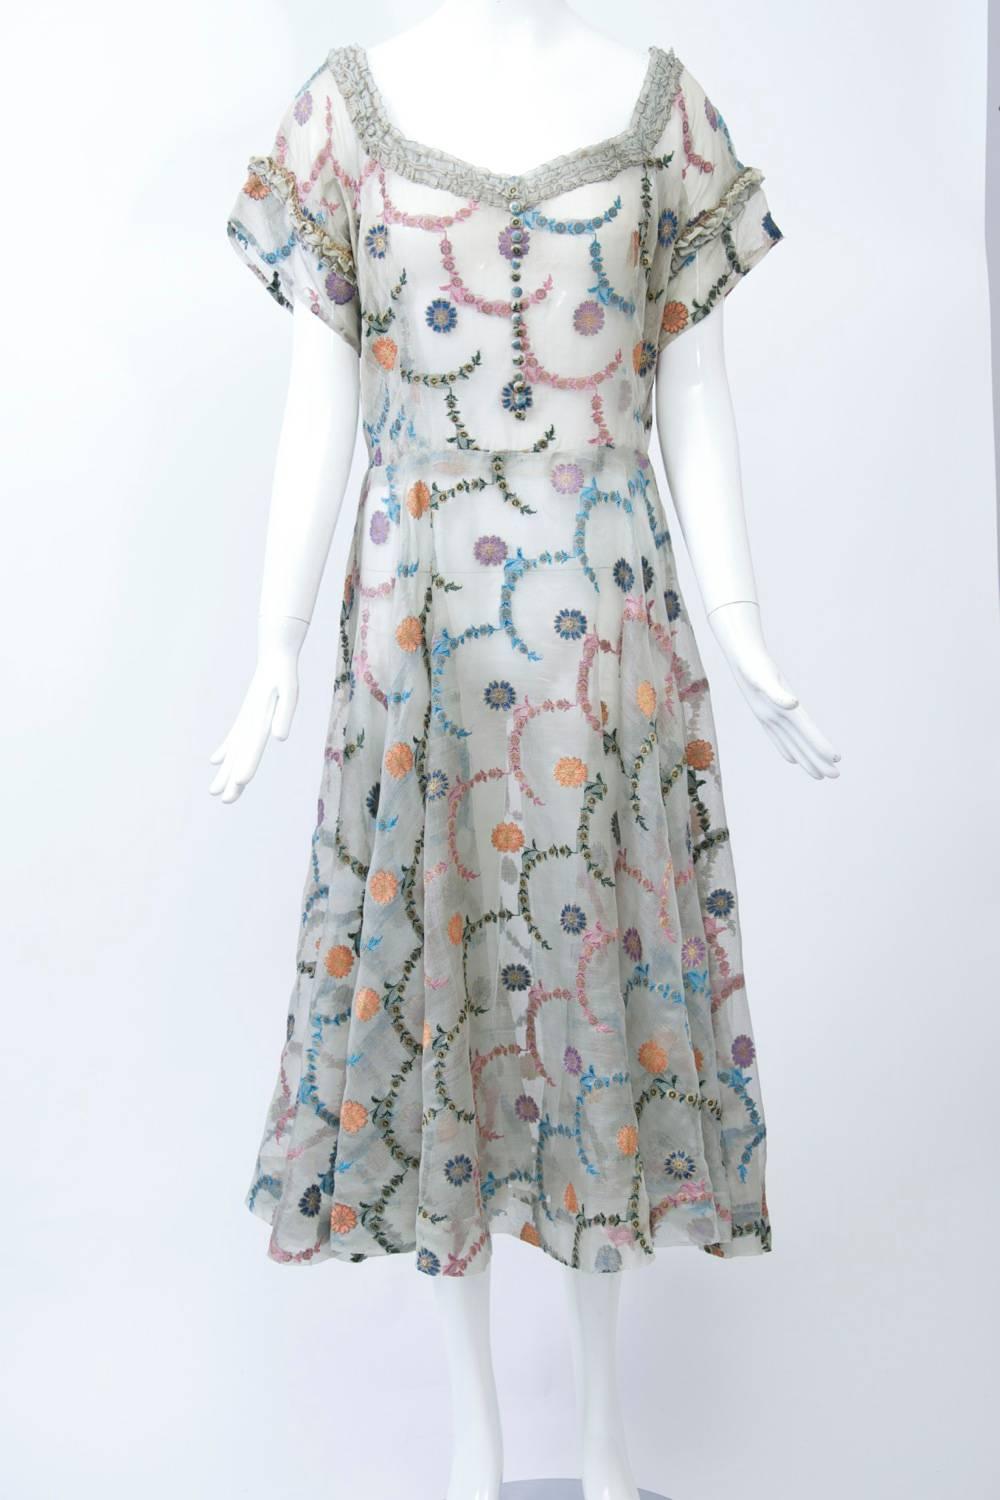 1950s silhouette in pale gray organza embroidered throughout with small flowers and half circle chains of smaller flowers and leaves in a pastel palette. The fitted bodice features short sleeves and ruching around the sweetheart neckline; the